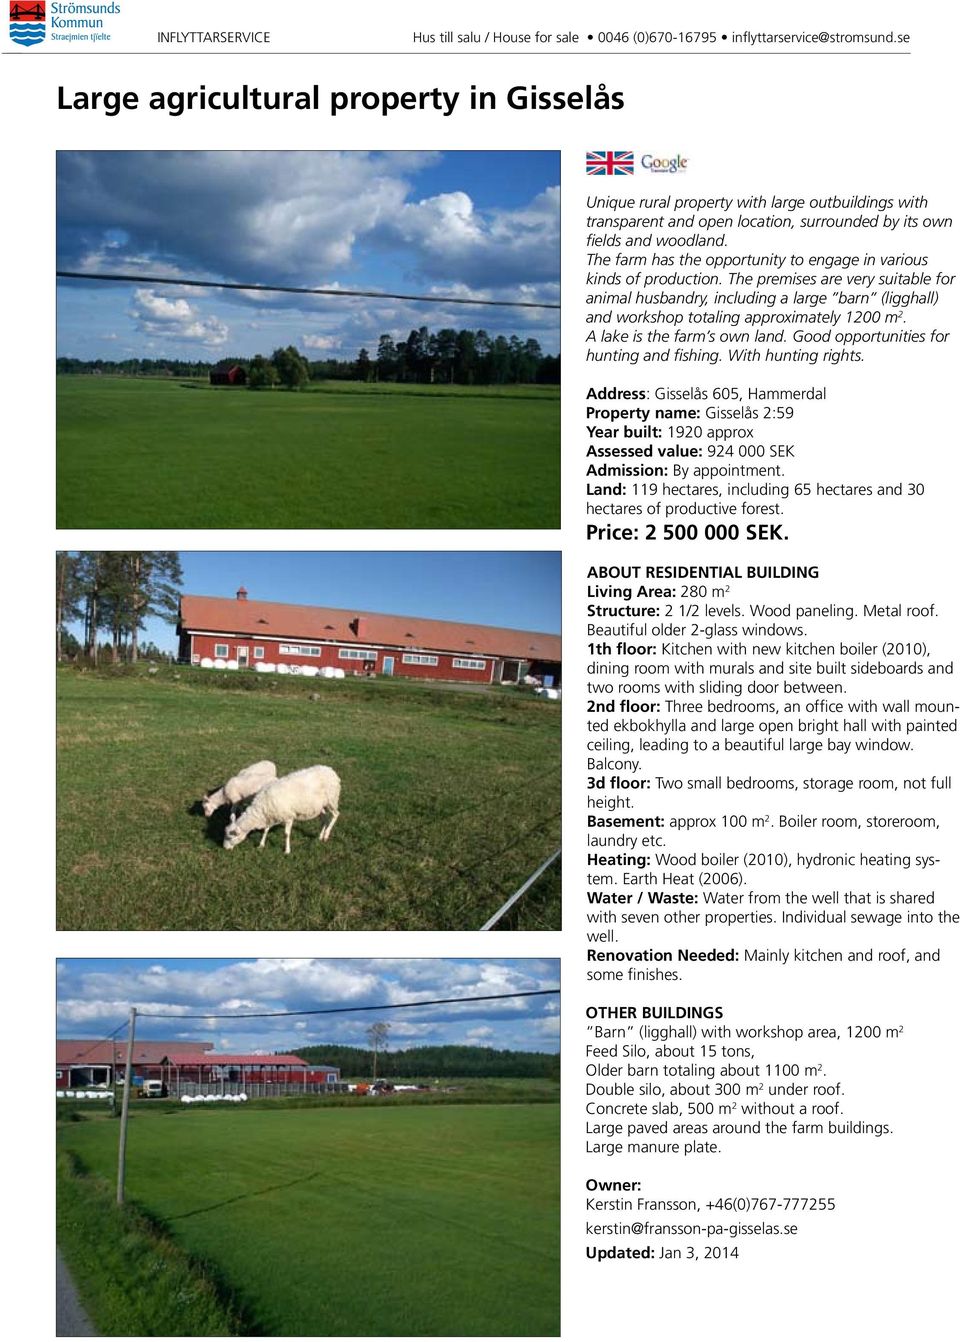 The premises are very suitable for animal husbandry, including a large barn (ligghall) and workshop totaling approximately 1200 m 2. A lake is the farm s own land.